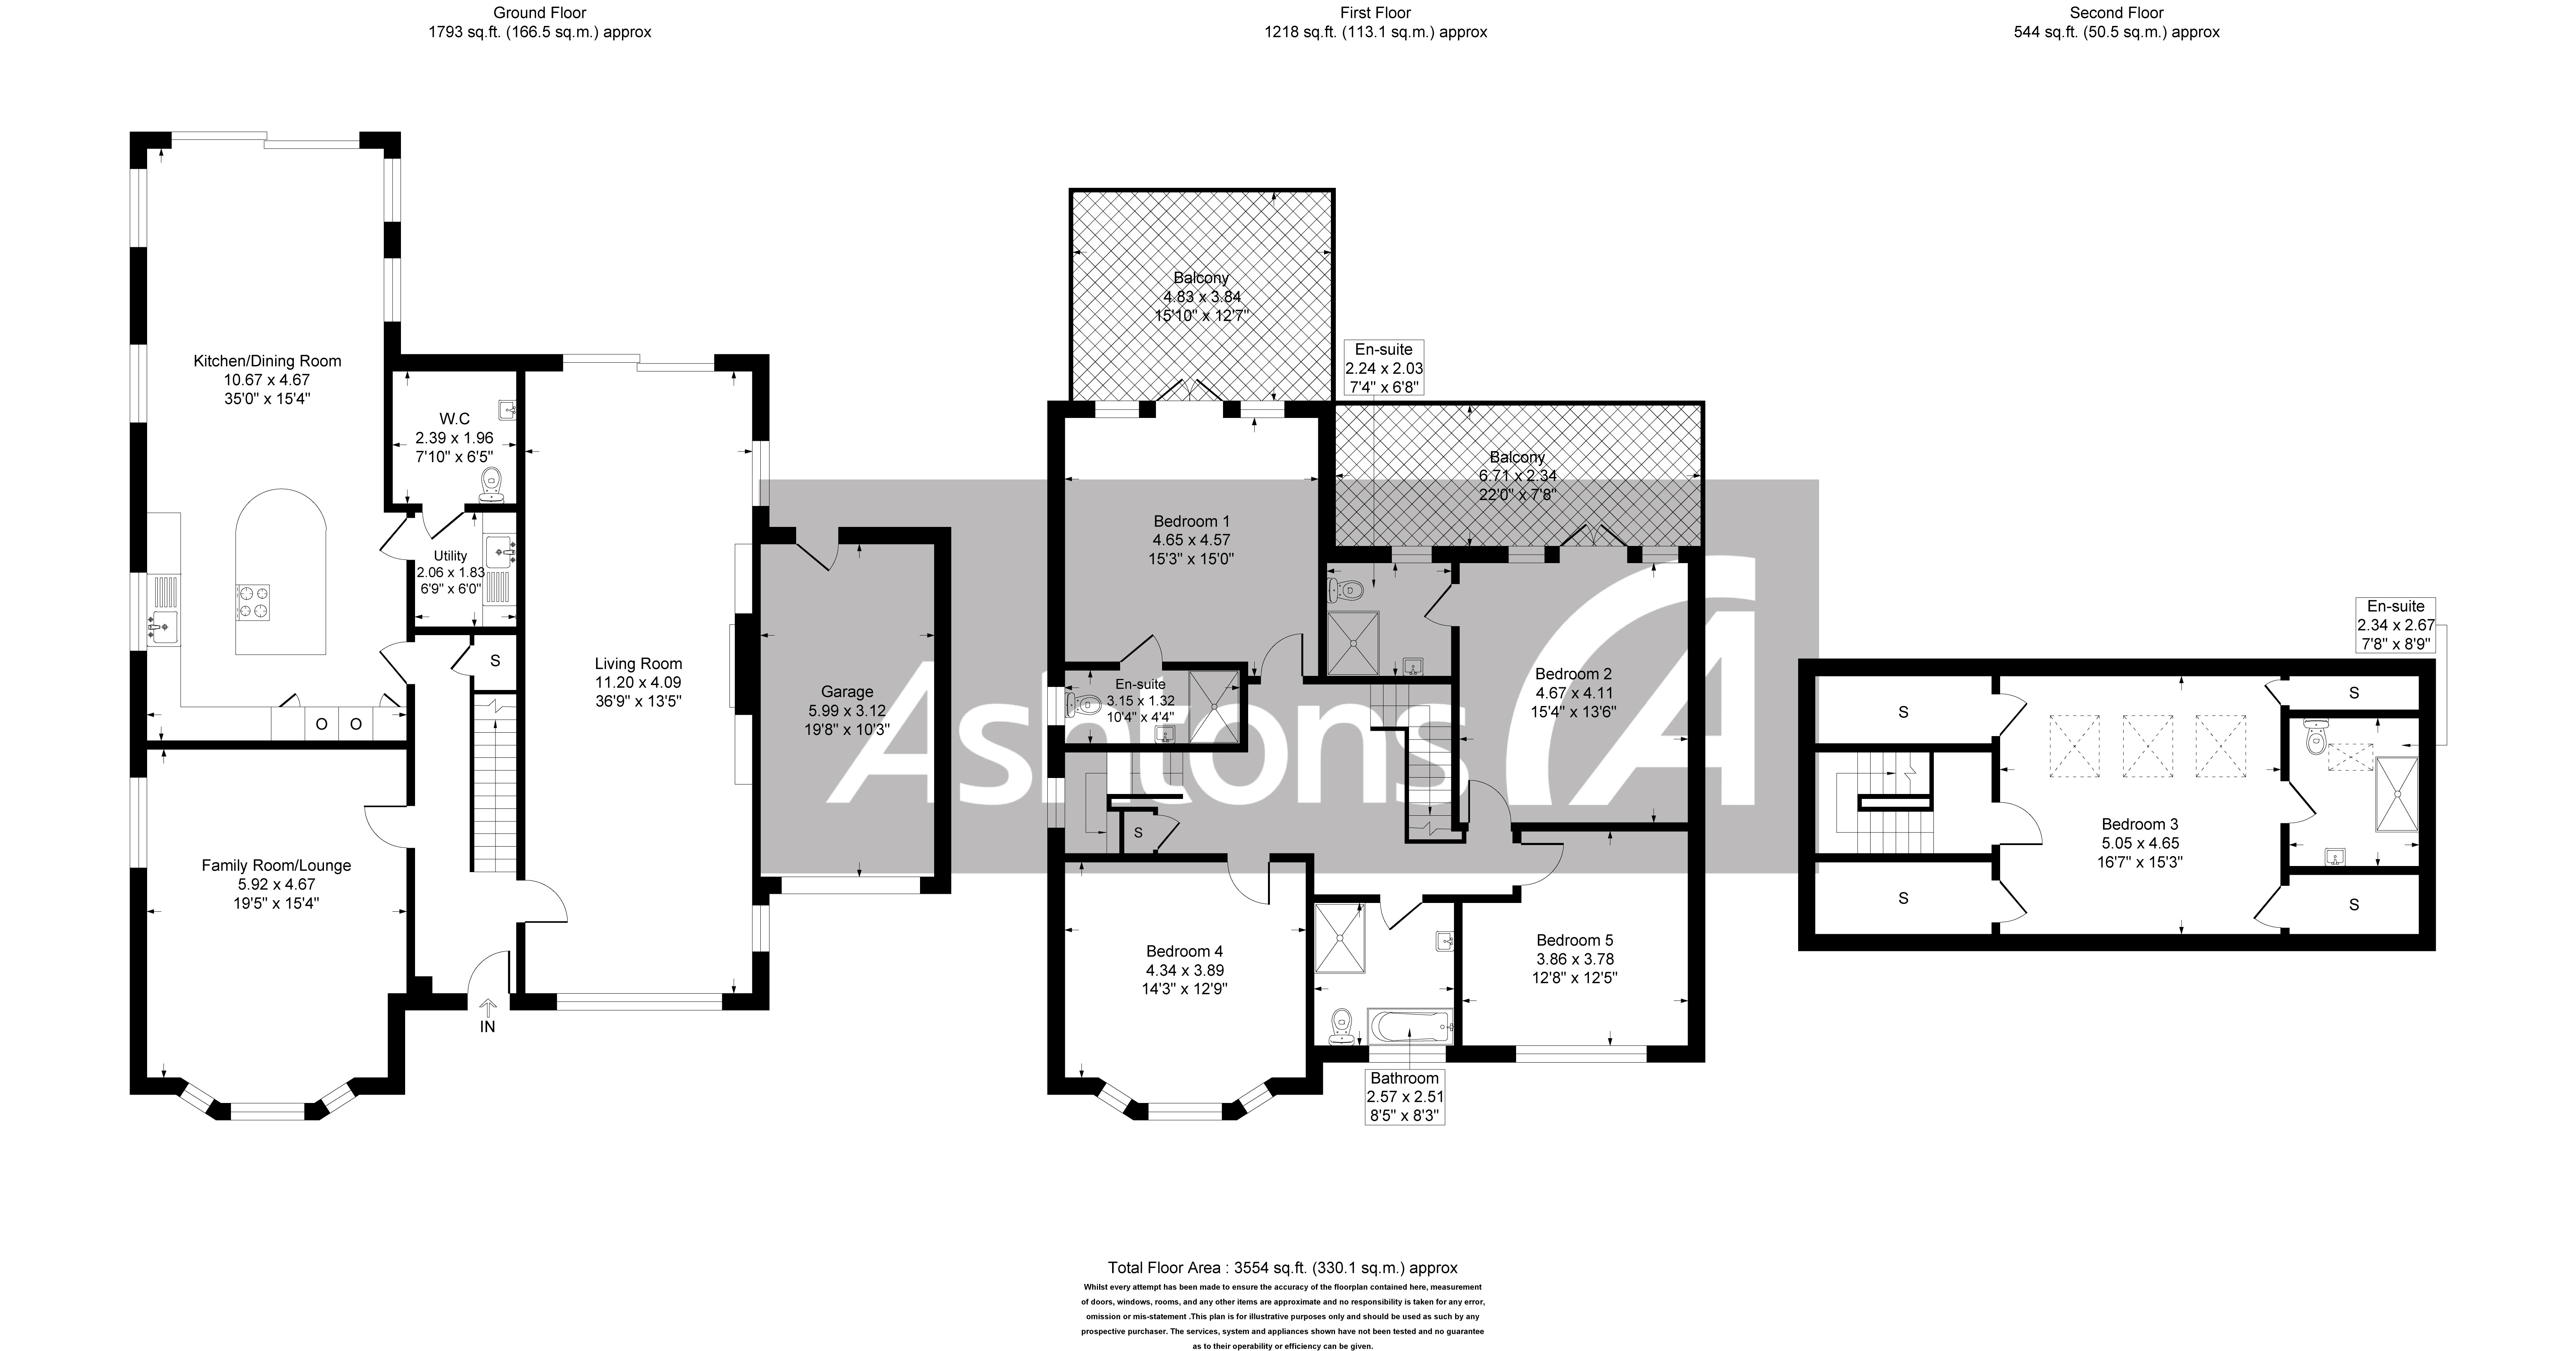 Manley House, The Firs, Frodsham Floor Plan